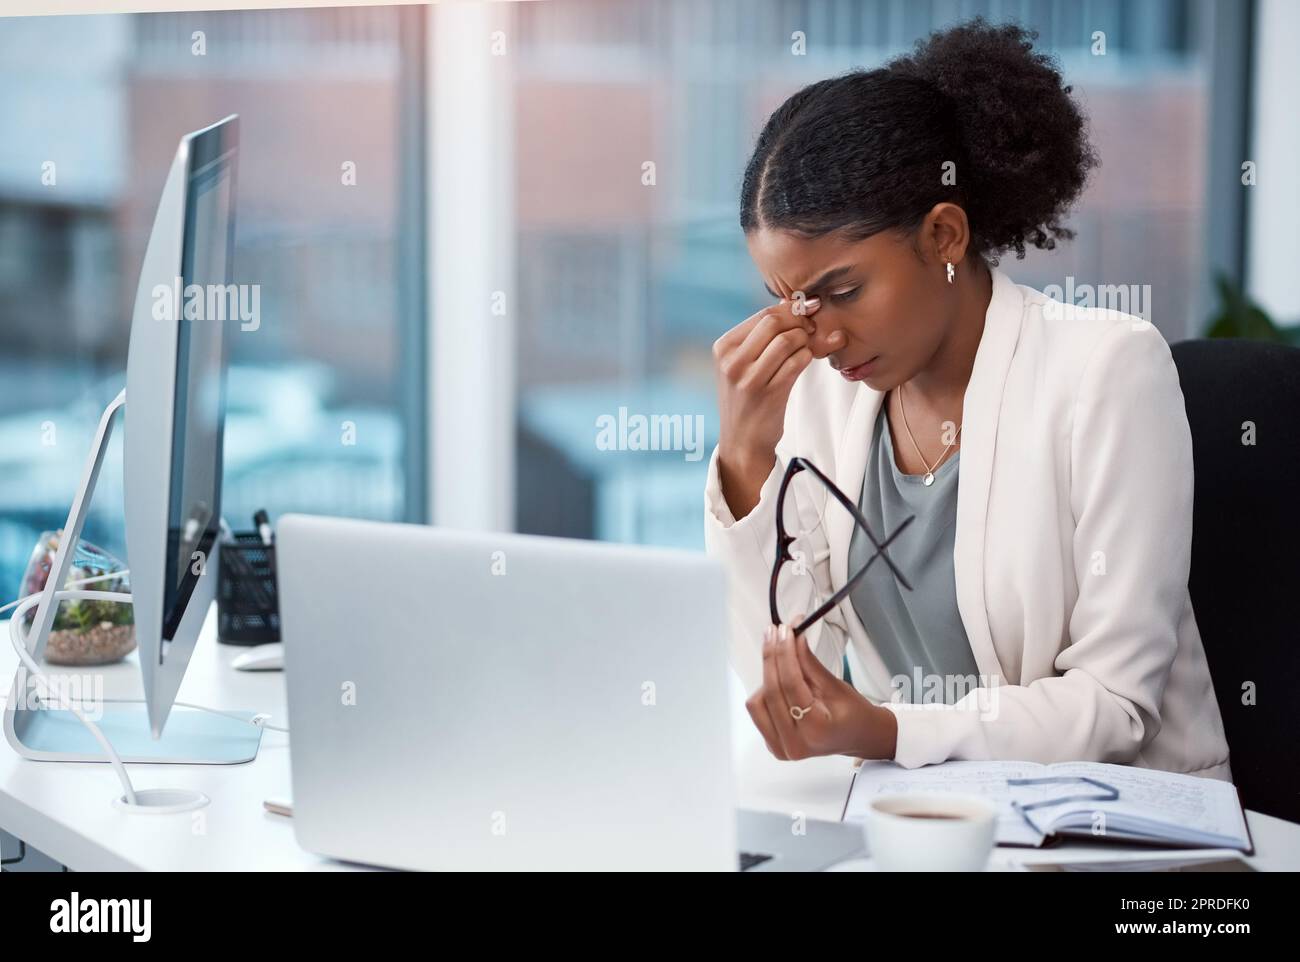 Female intern suffering from a headache or migraine due to stress caused by deadlines and work pressures. Professional in pain feeling bad, stressed and frustrated while busy on her computer desk Stock Photo